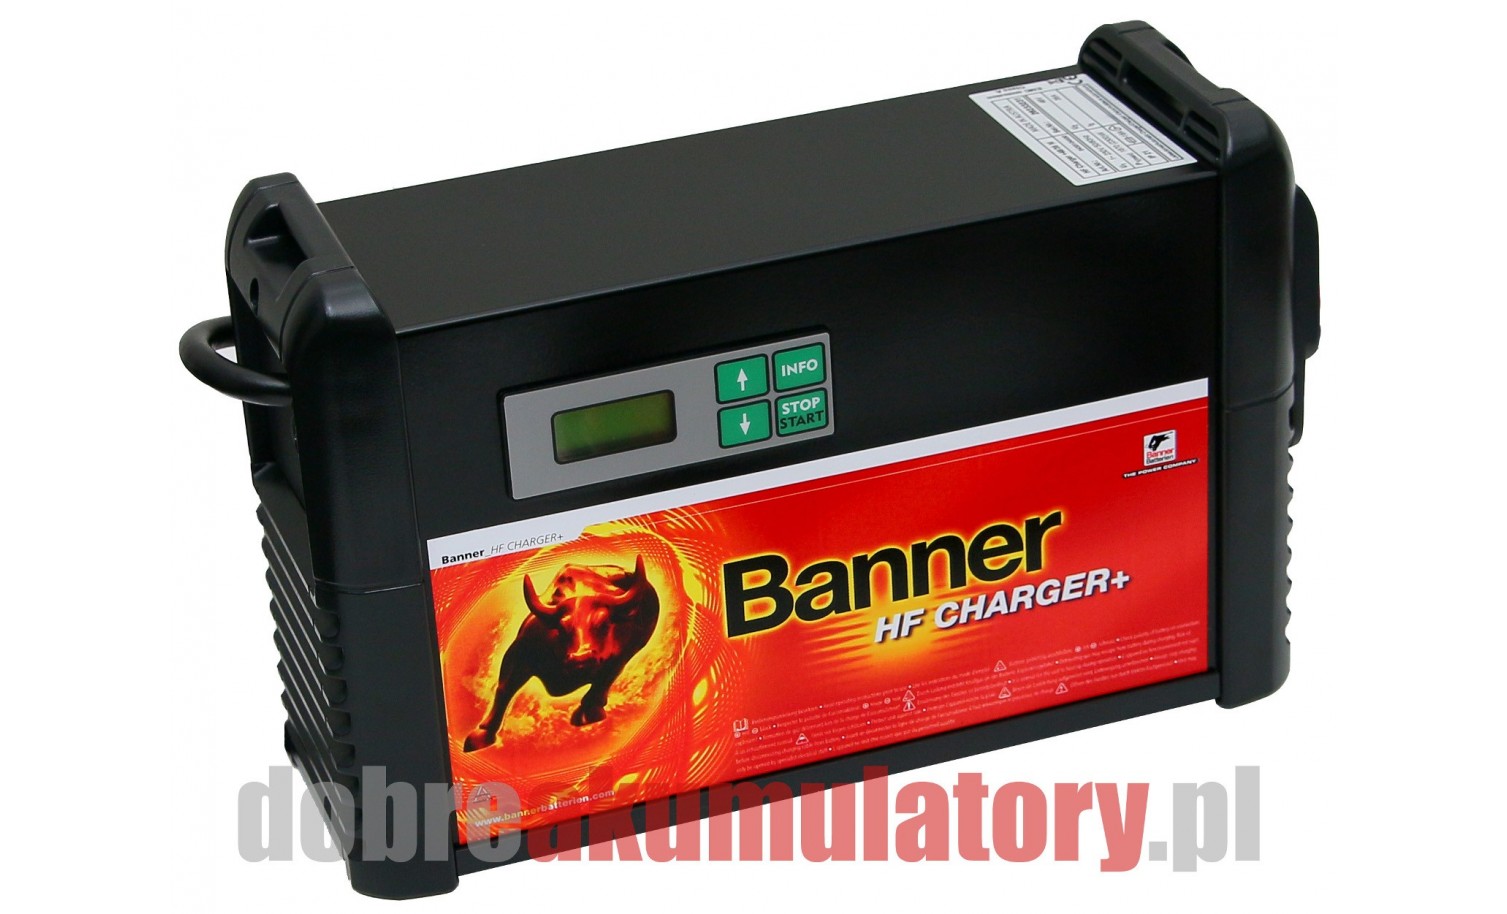 BANNER CHARGER HG PLUS 4035 M HF+ 4035M 230V/10A